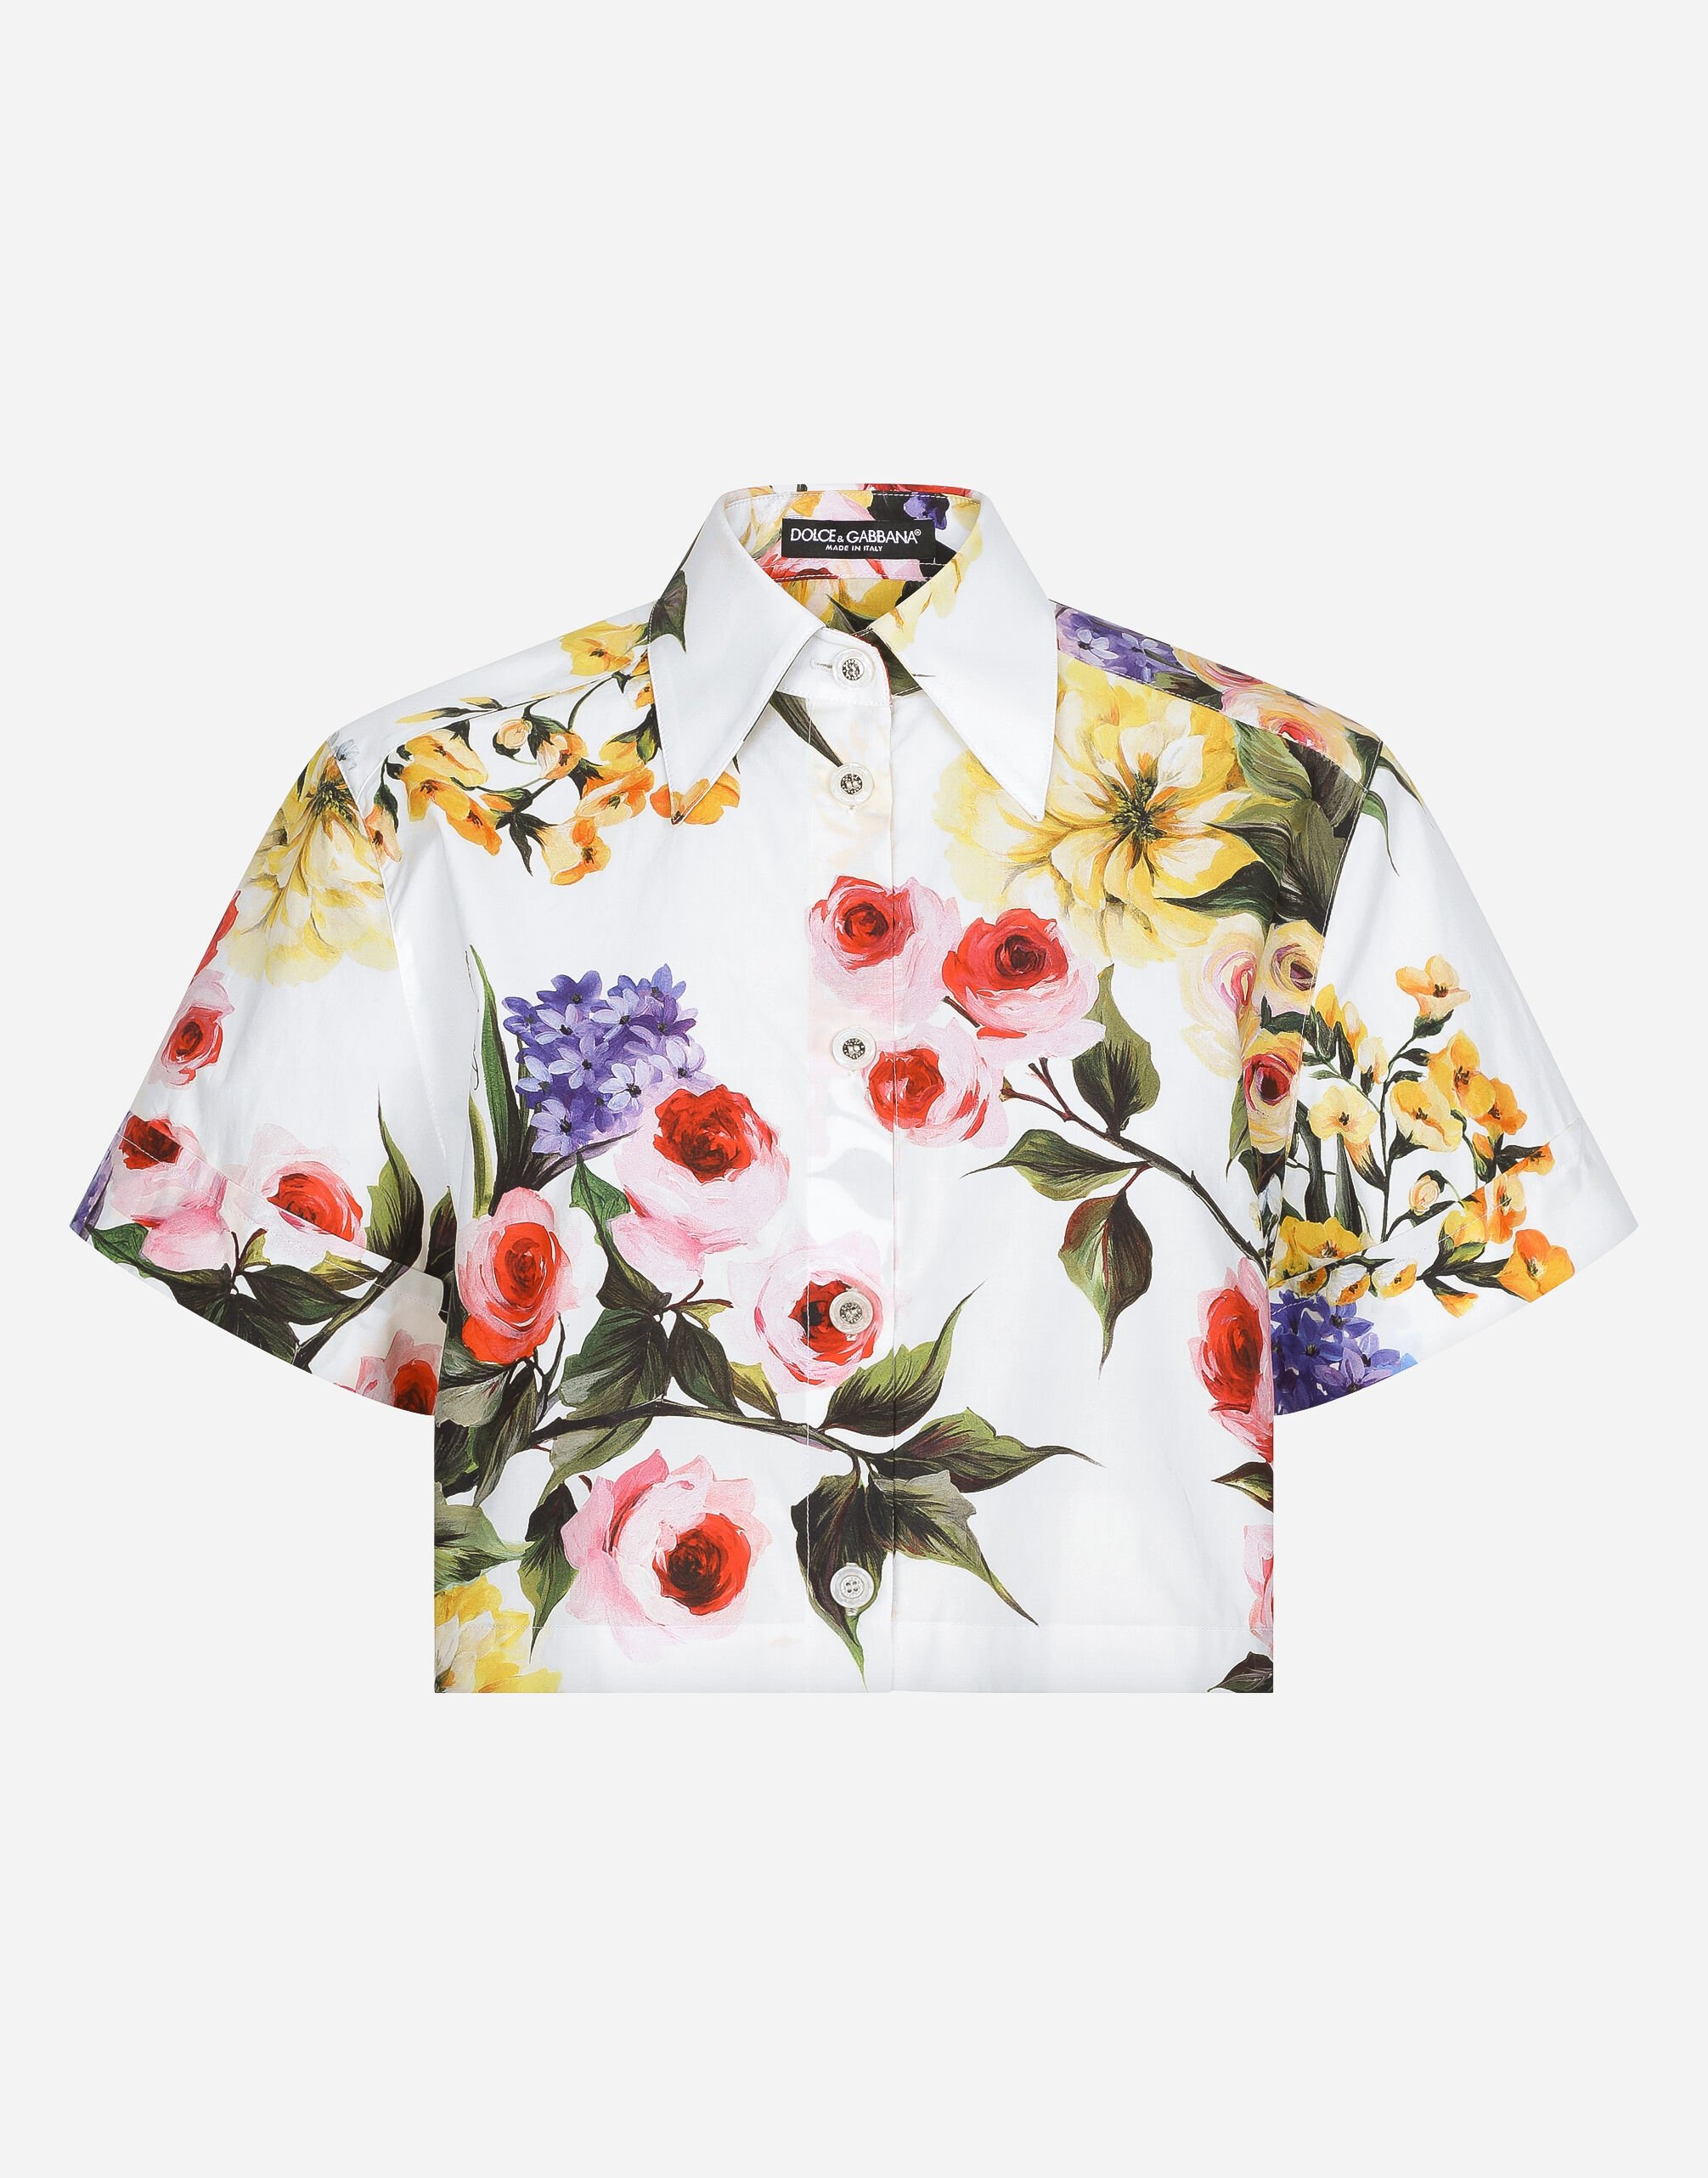 Dolce&Gabbana Short cotton shirt with garden print Multicolor F6AHITHPADV